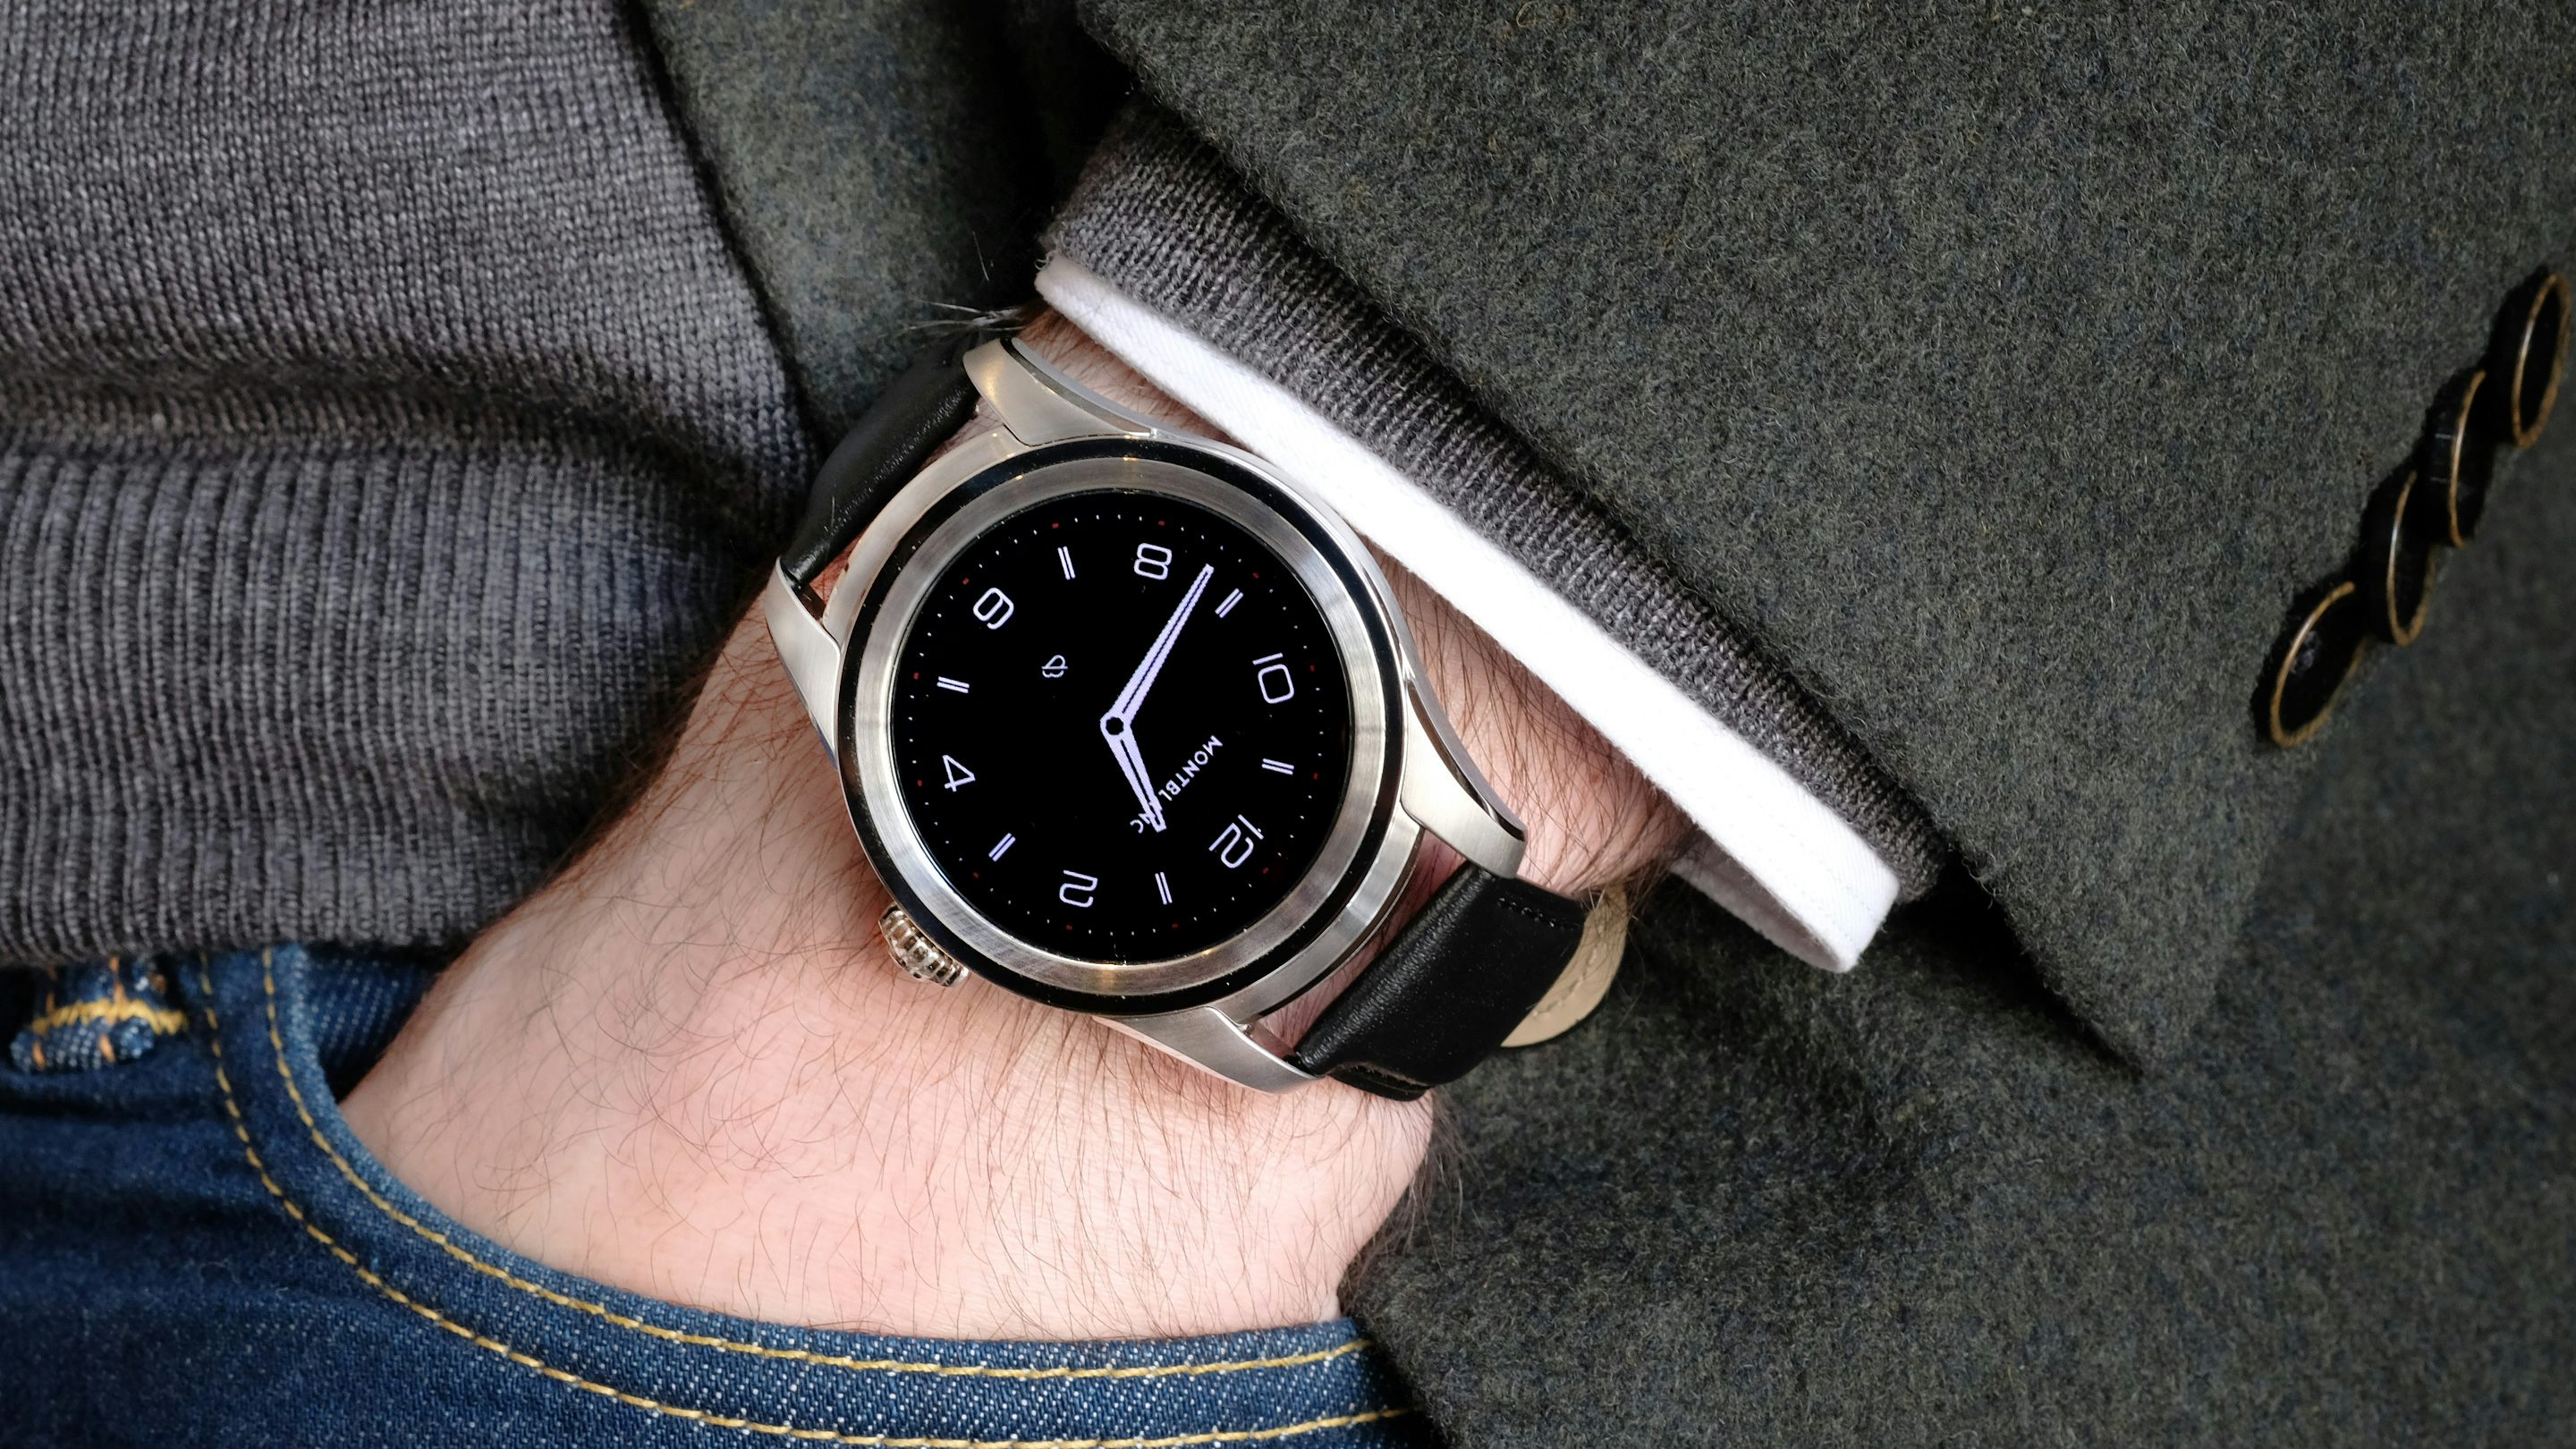 If this is Nothing's first smartwatch, I'm not interested